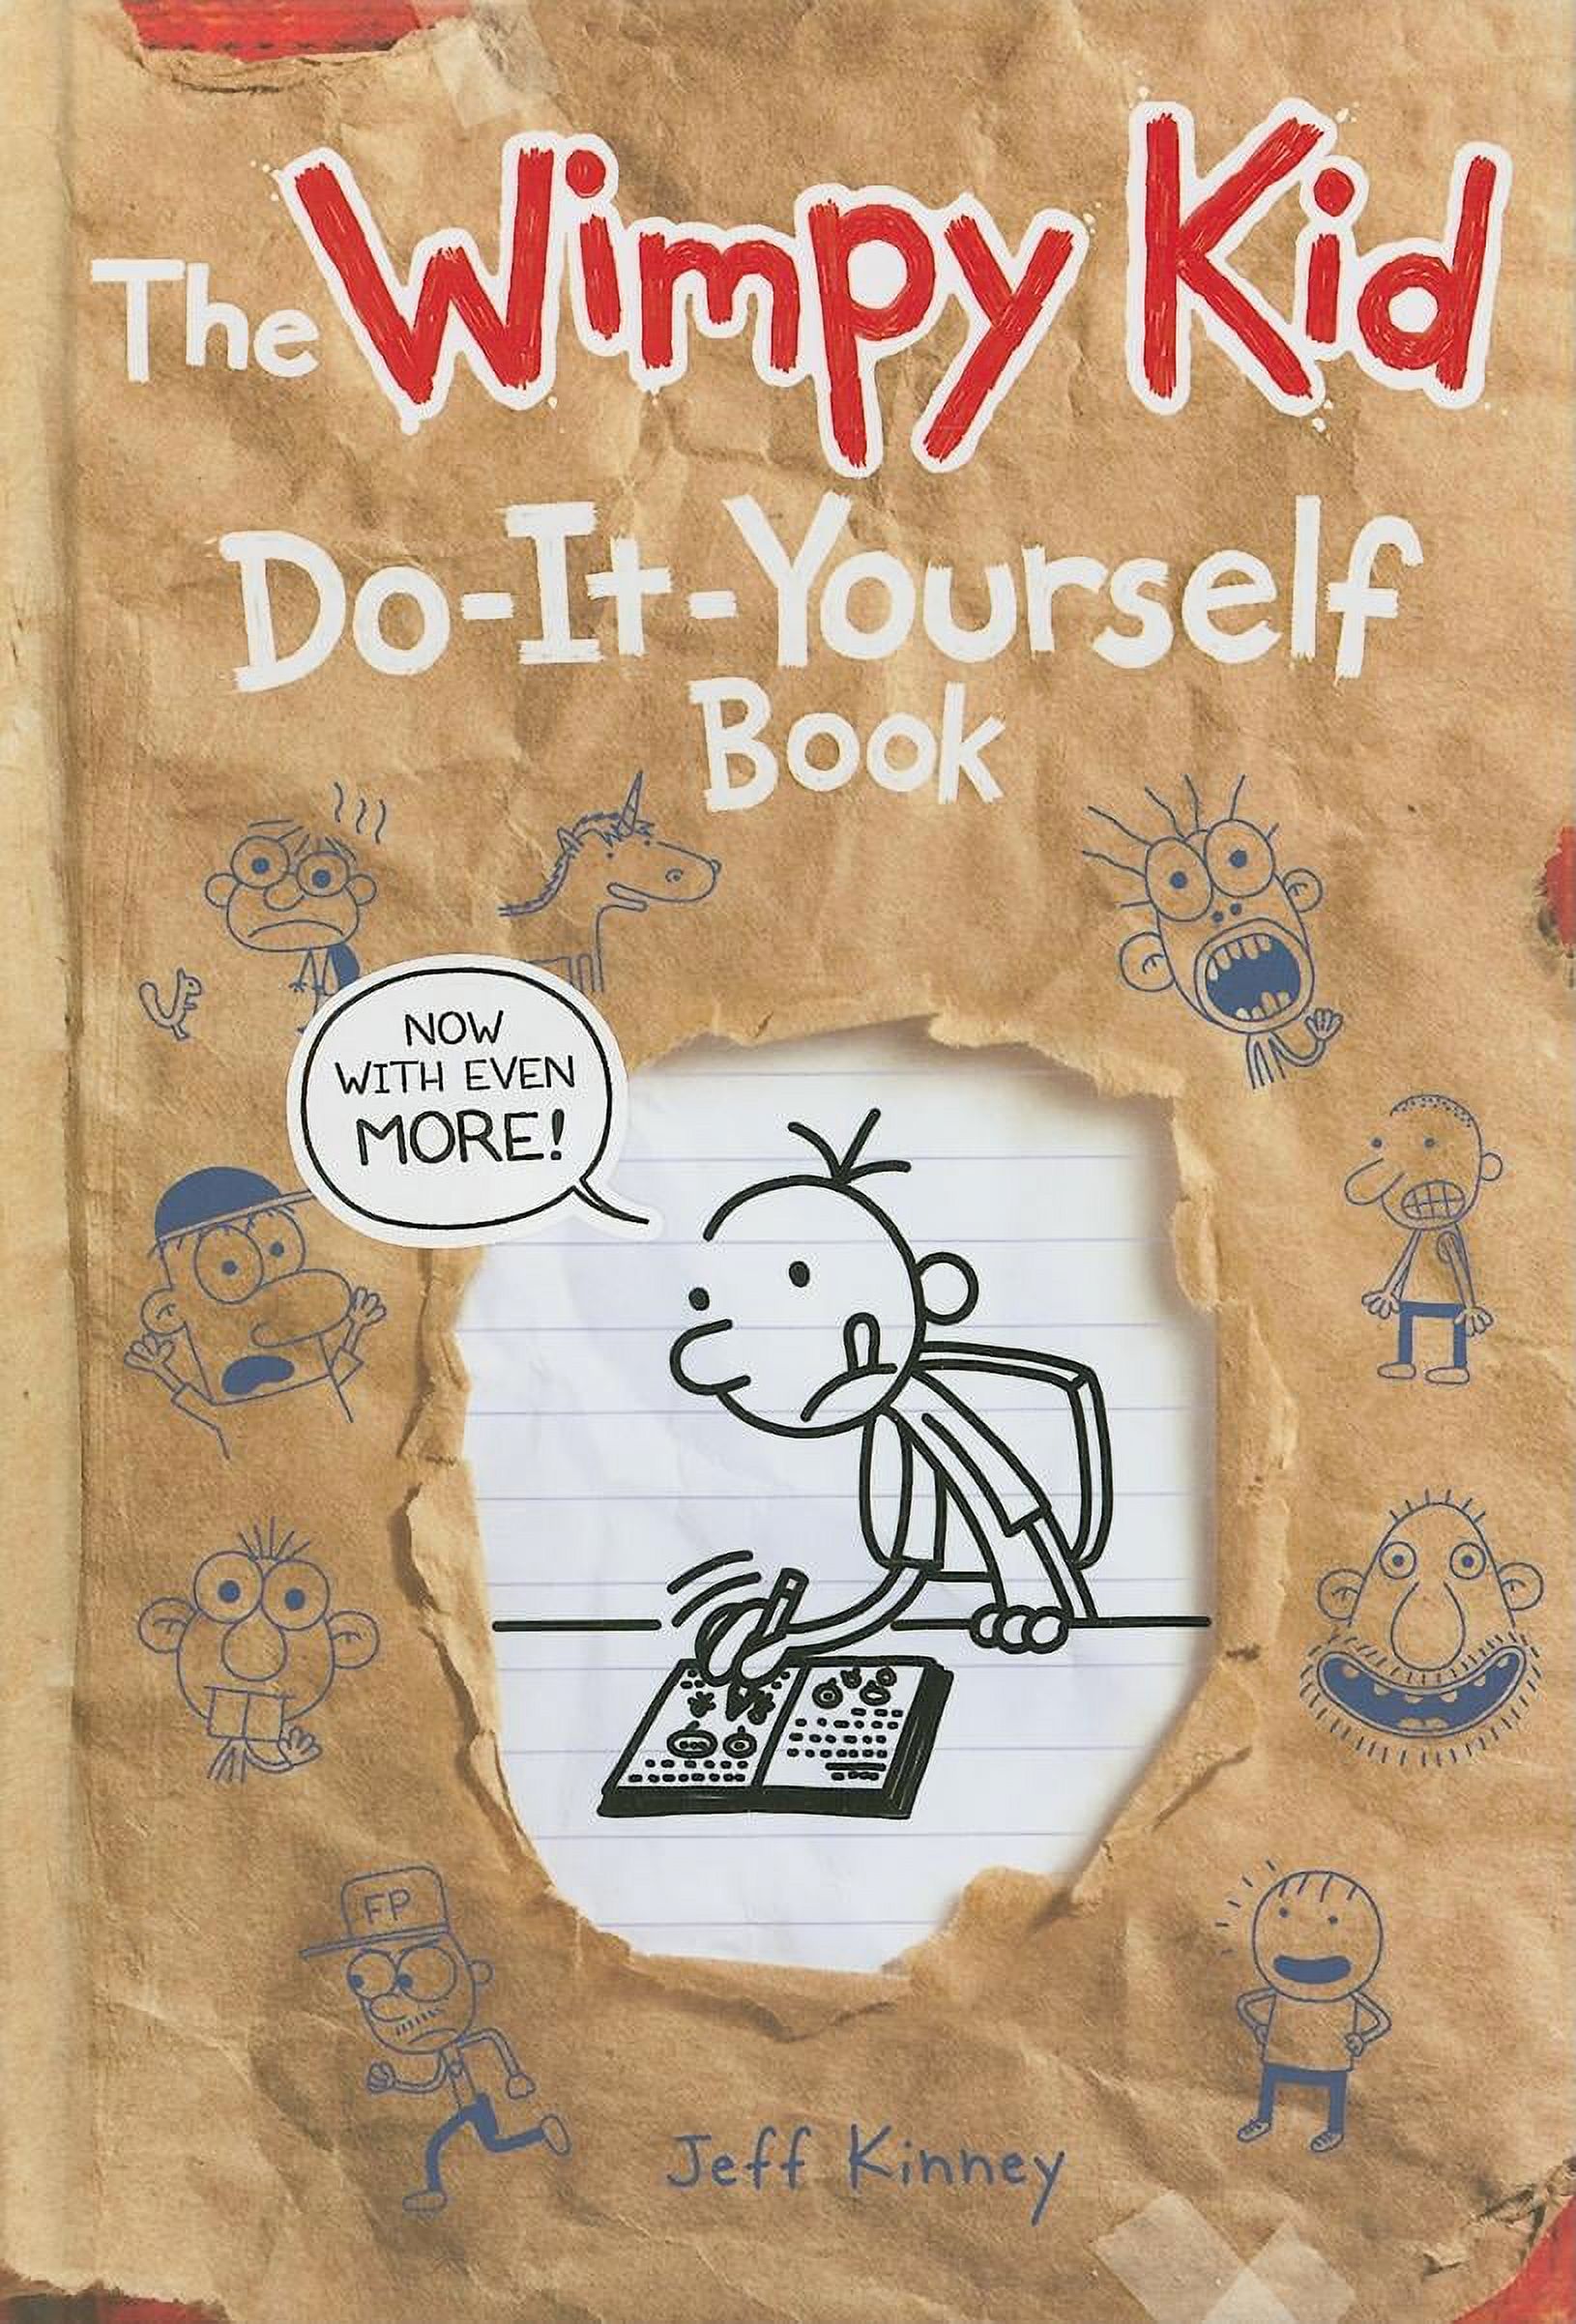 The Wimpy Kid Do-It-Yourself Book - image 1 of 2